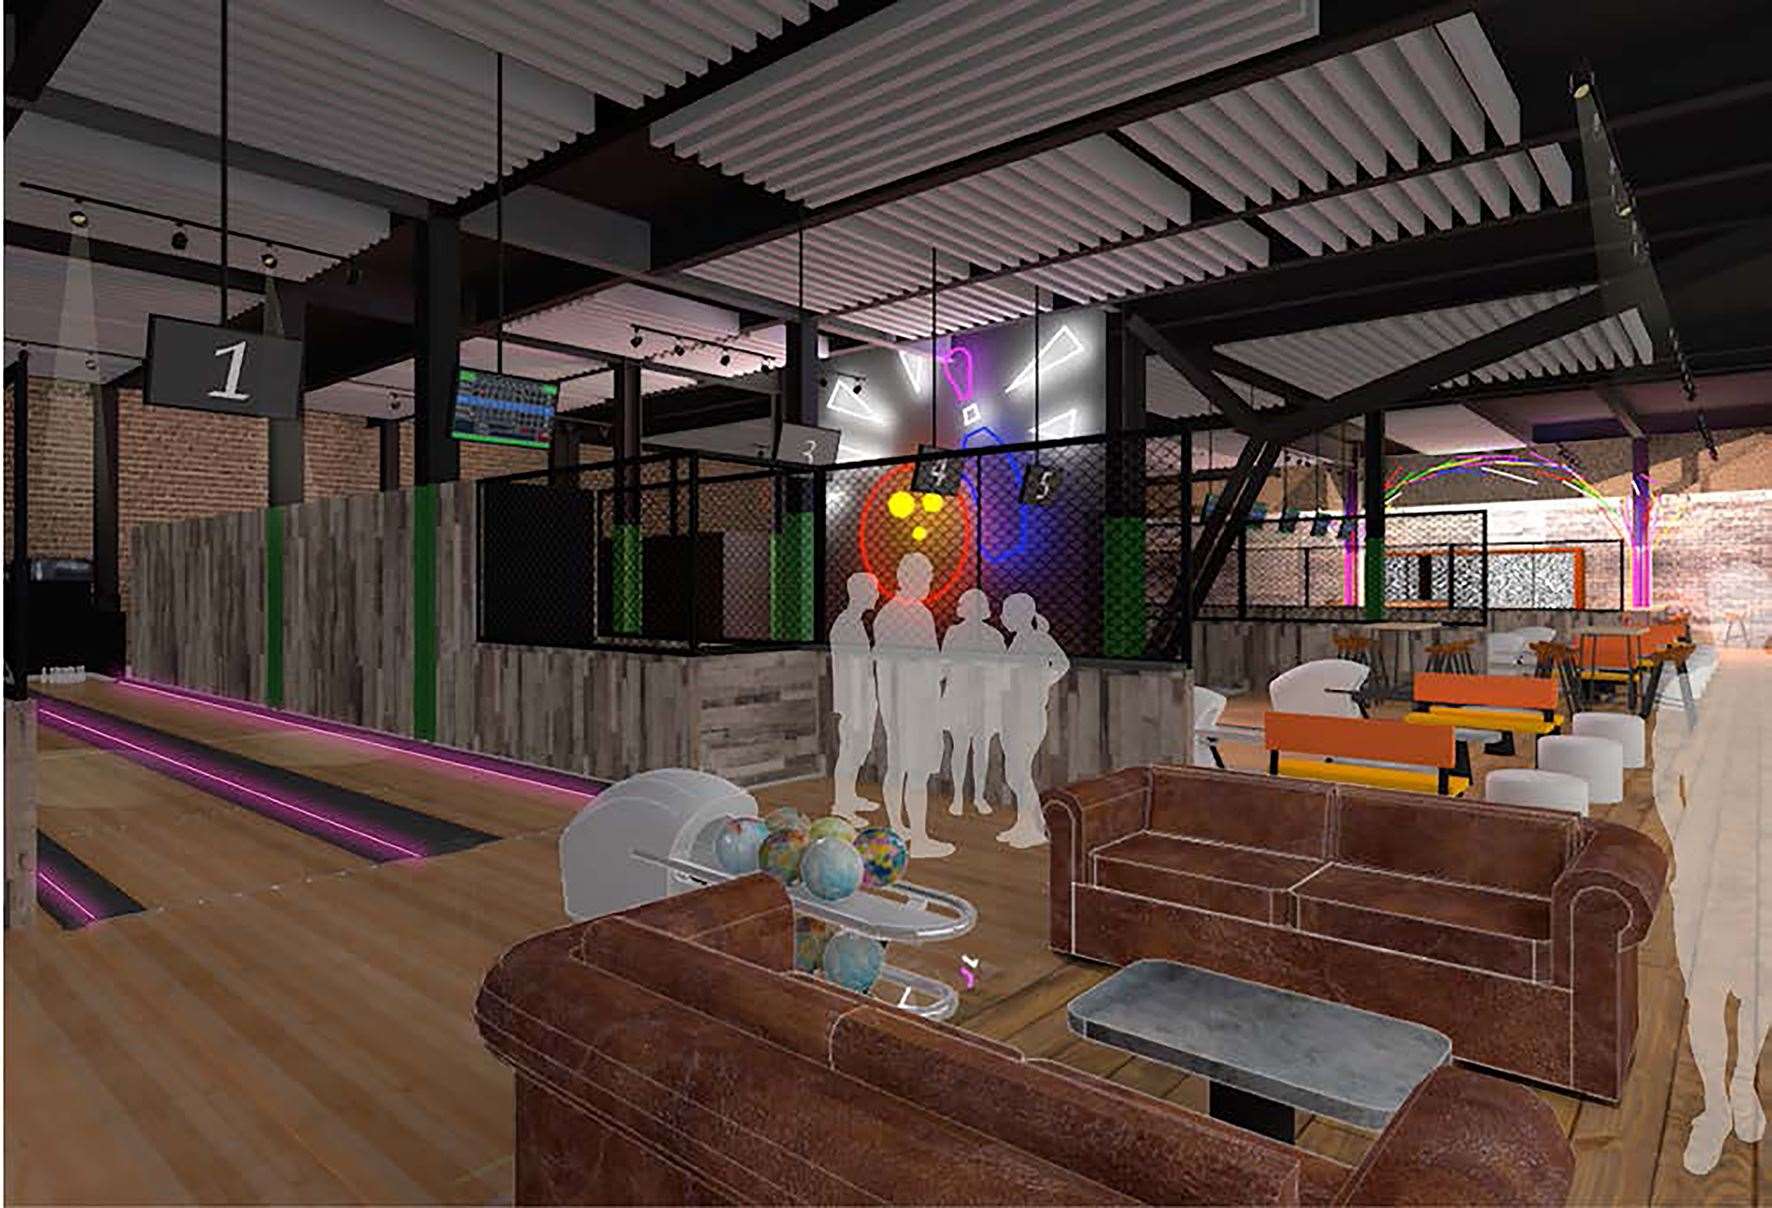 What the bowling alley seating and lanes could look like at Sittingbourne's Bourne Place leisure quarter. Picture: The Light Cinema